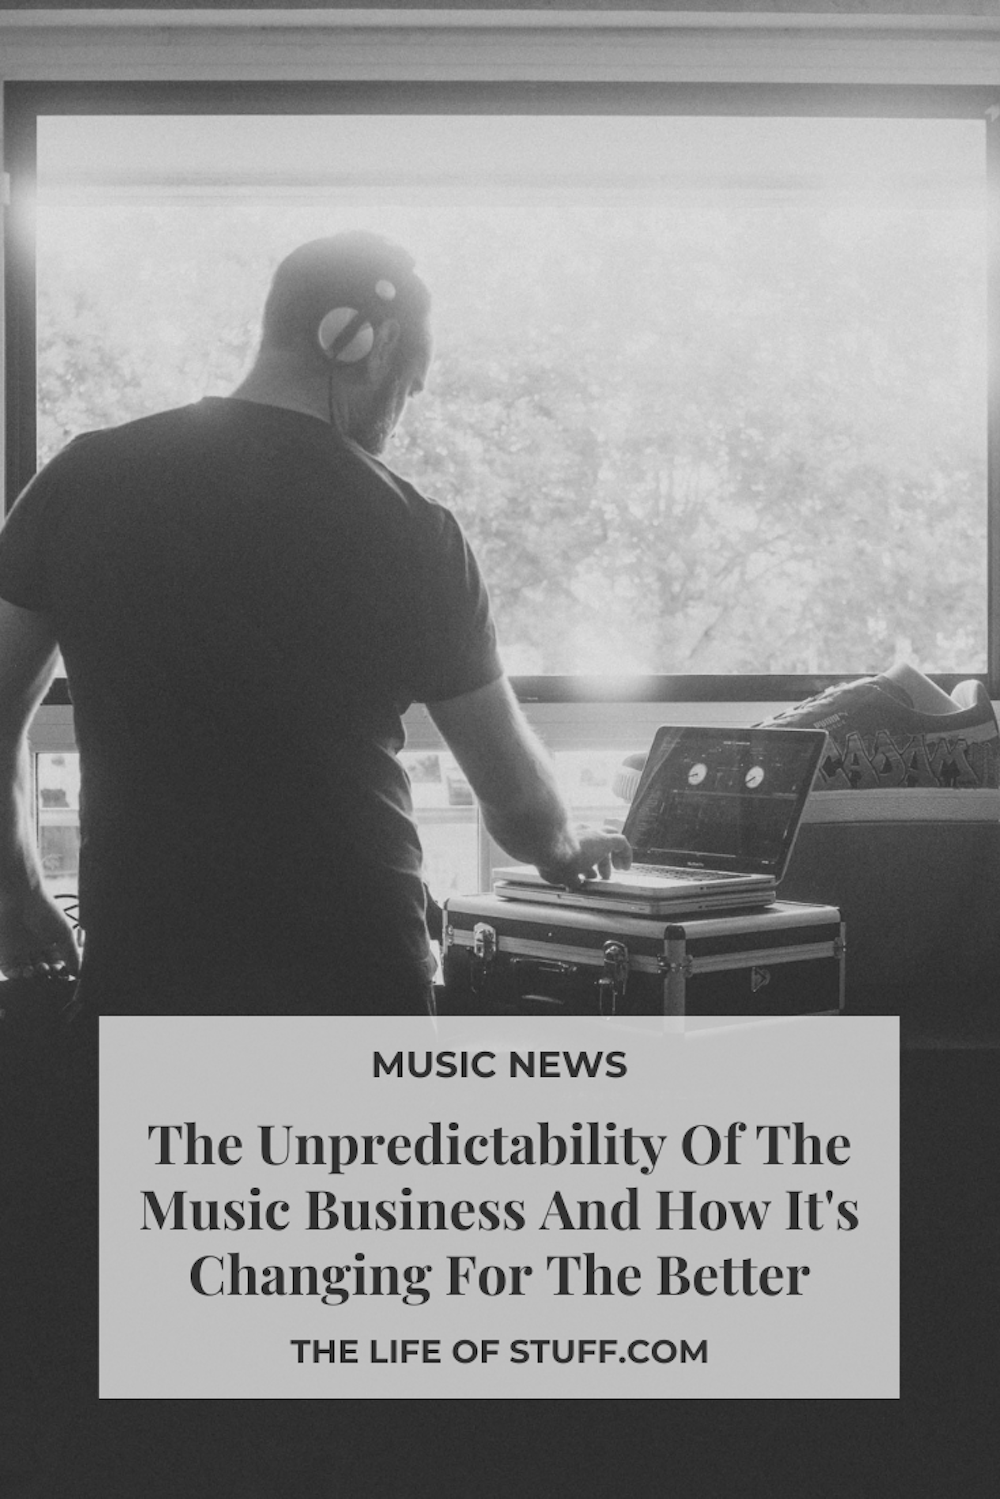 The Unpredictability Of The Music Business And How It's Changing For The Better - The Life of Stuff